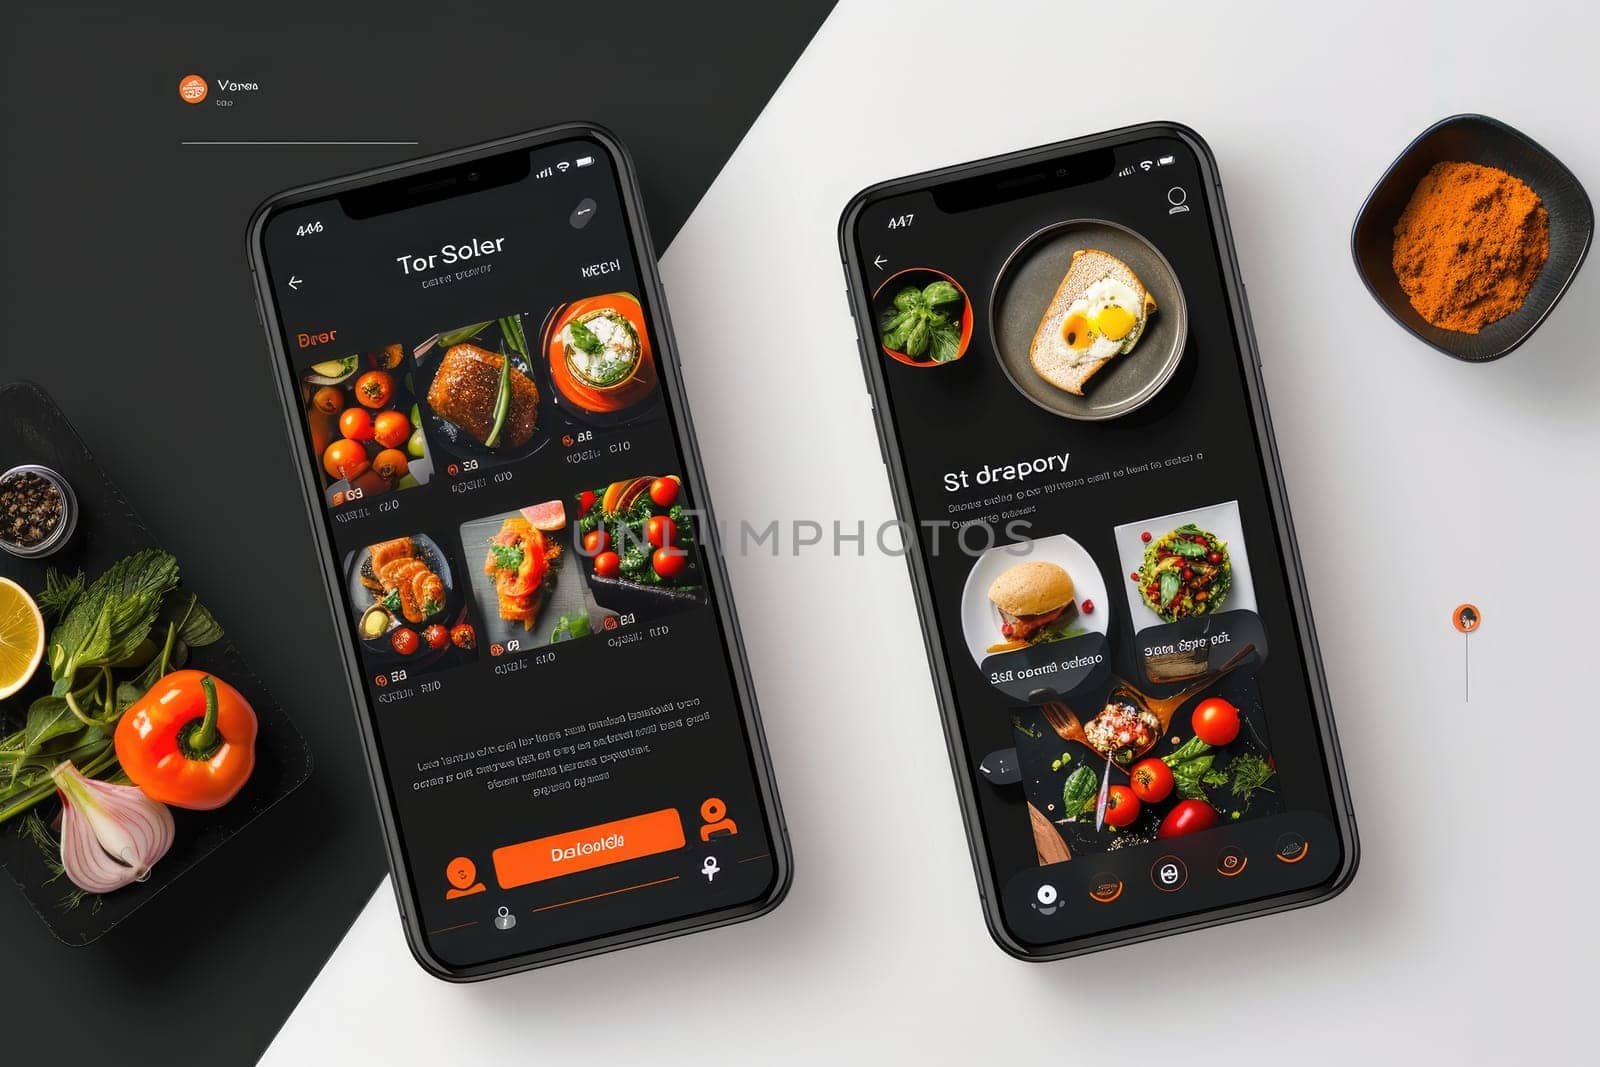 UI Application design for food school, dynaic, black, white, orange and red colors